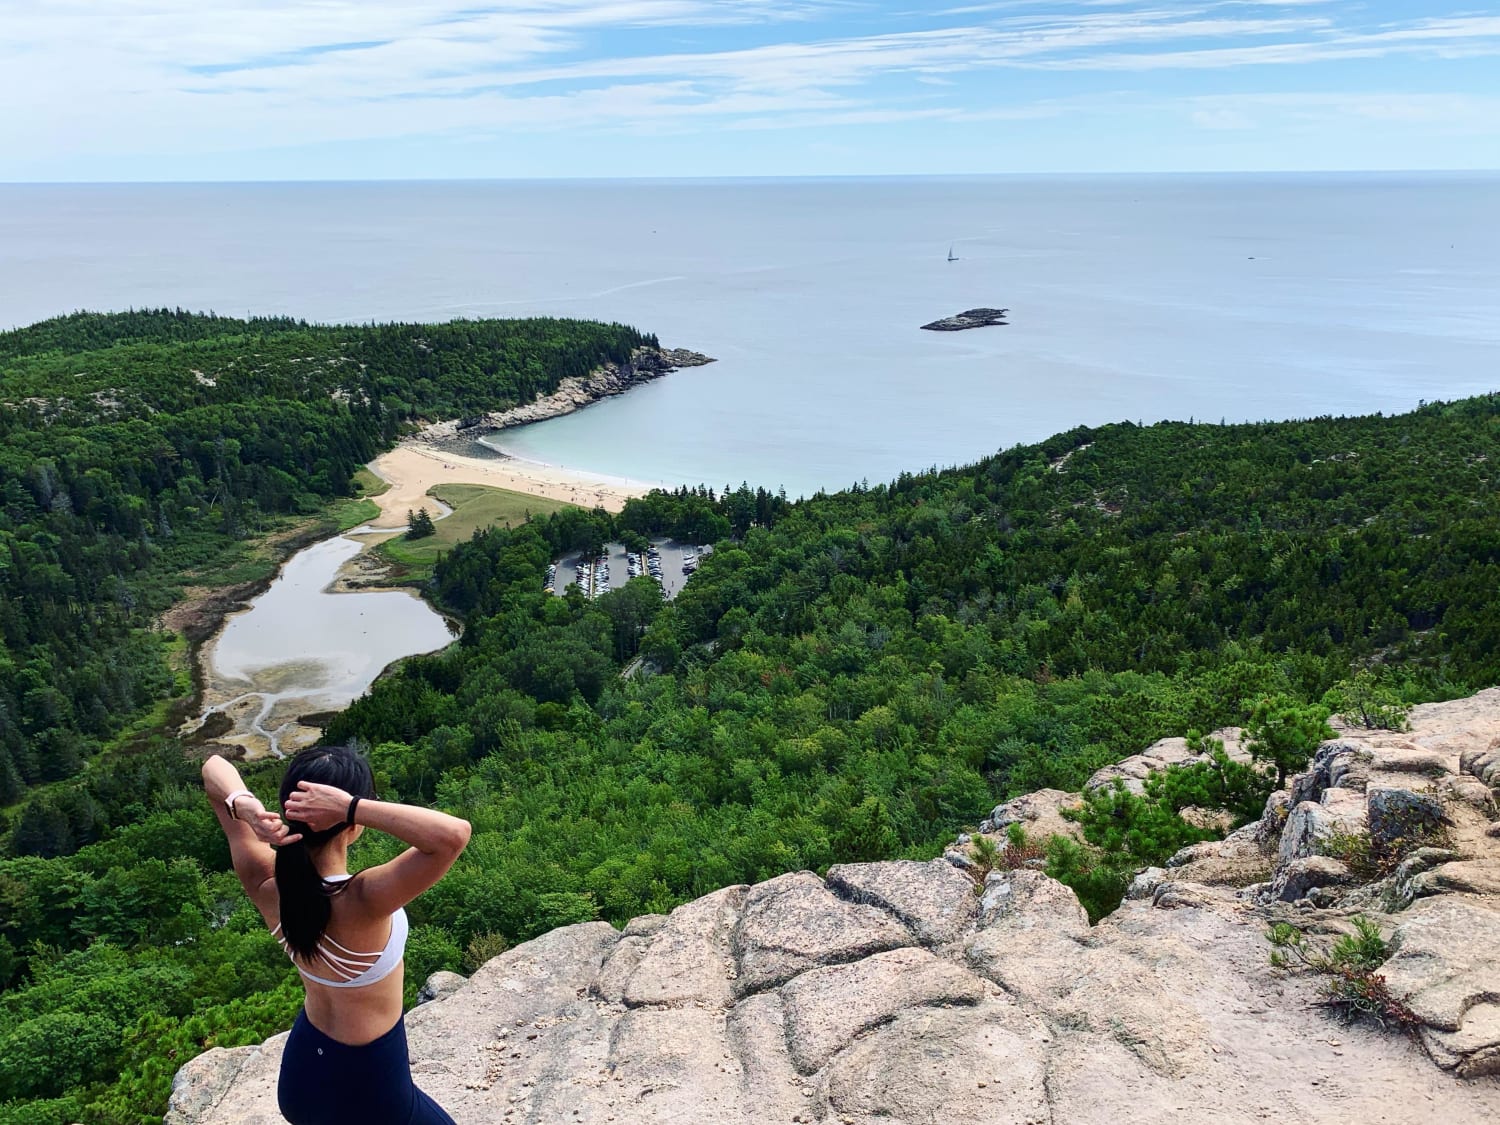 Hiked Beehive Trail in Acadia National Park, Maine USA